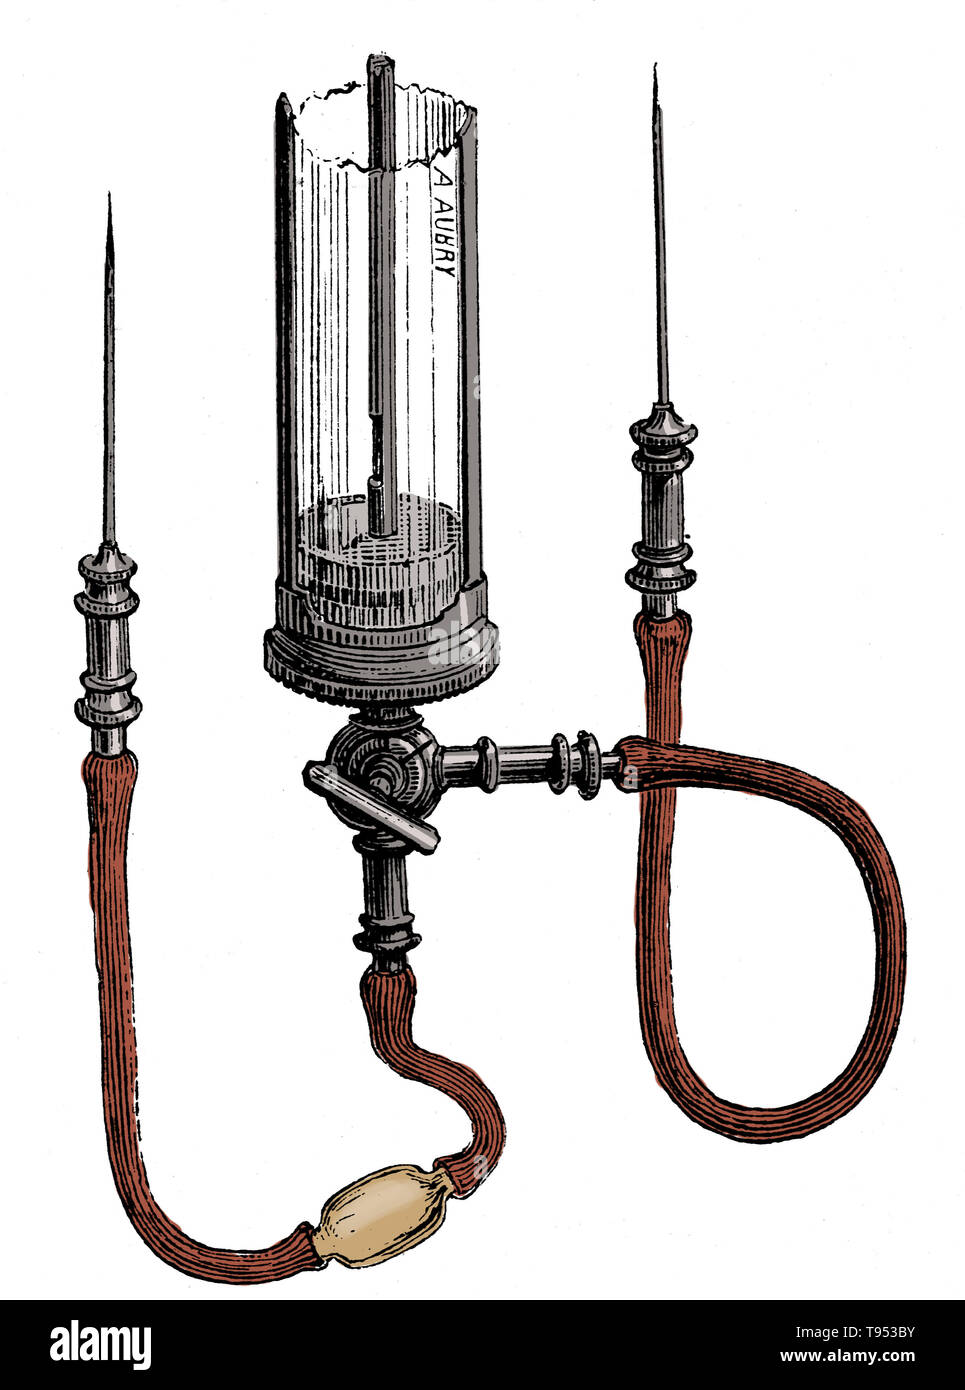 Blood transfusion apparatus by LeBlonds and Collins, from 1876. Beginning with Harvey's experiments with circulation of the blood, research into blood transfusion began in the 17th century, with successful experiments in transfusion between animals. However, successive attempts by physicians to transfuse animal blood into humans gave variable, often fatal, results. Early transfusions between humans were risky and many resulted in the death of the patient. It was not until 1901, when the Austrian Karl Landsteiner discovered human blood groups, that blood transfusions became safer. Stock Photo